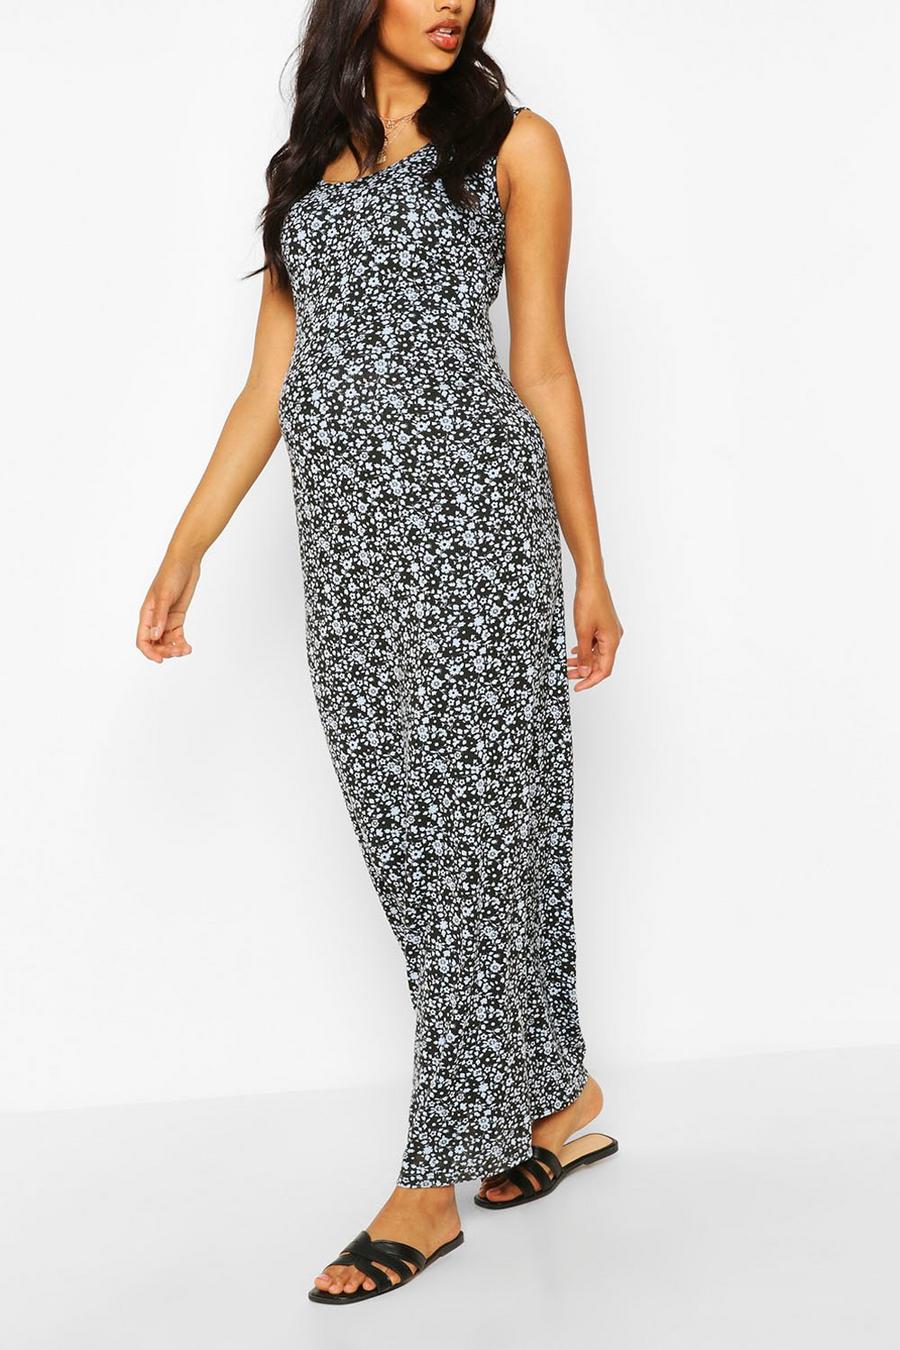 Sky blue Maternity Ditsy Floral Scoop Neck Maxi Dress